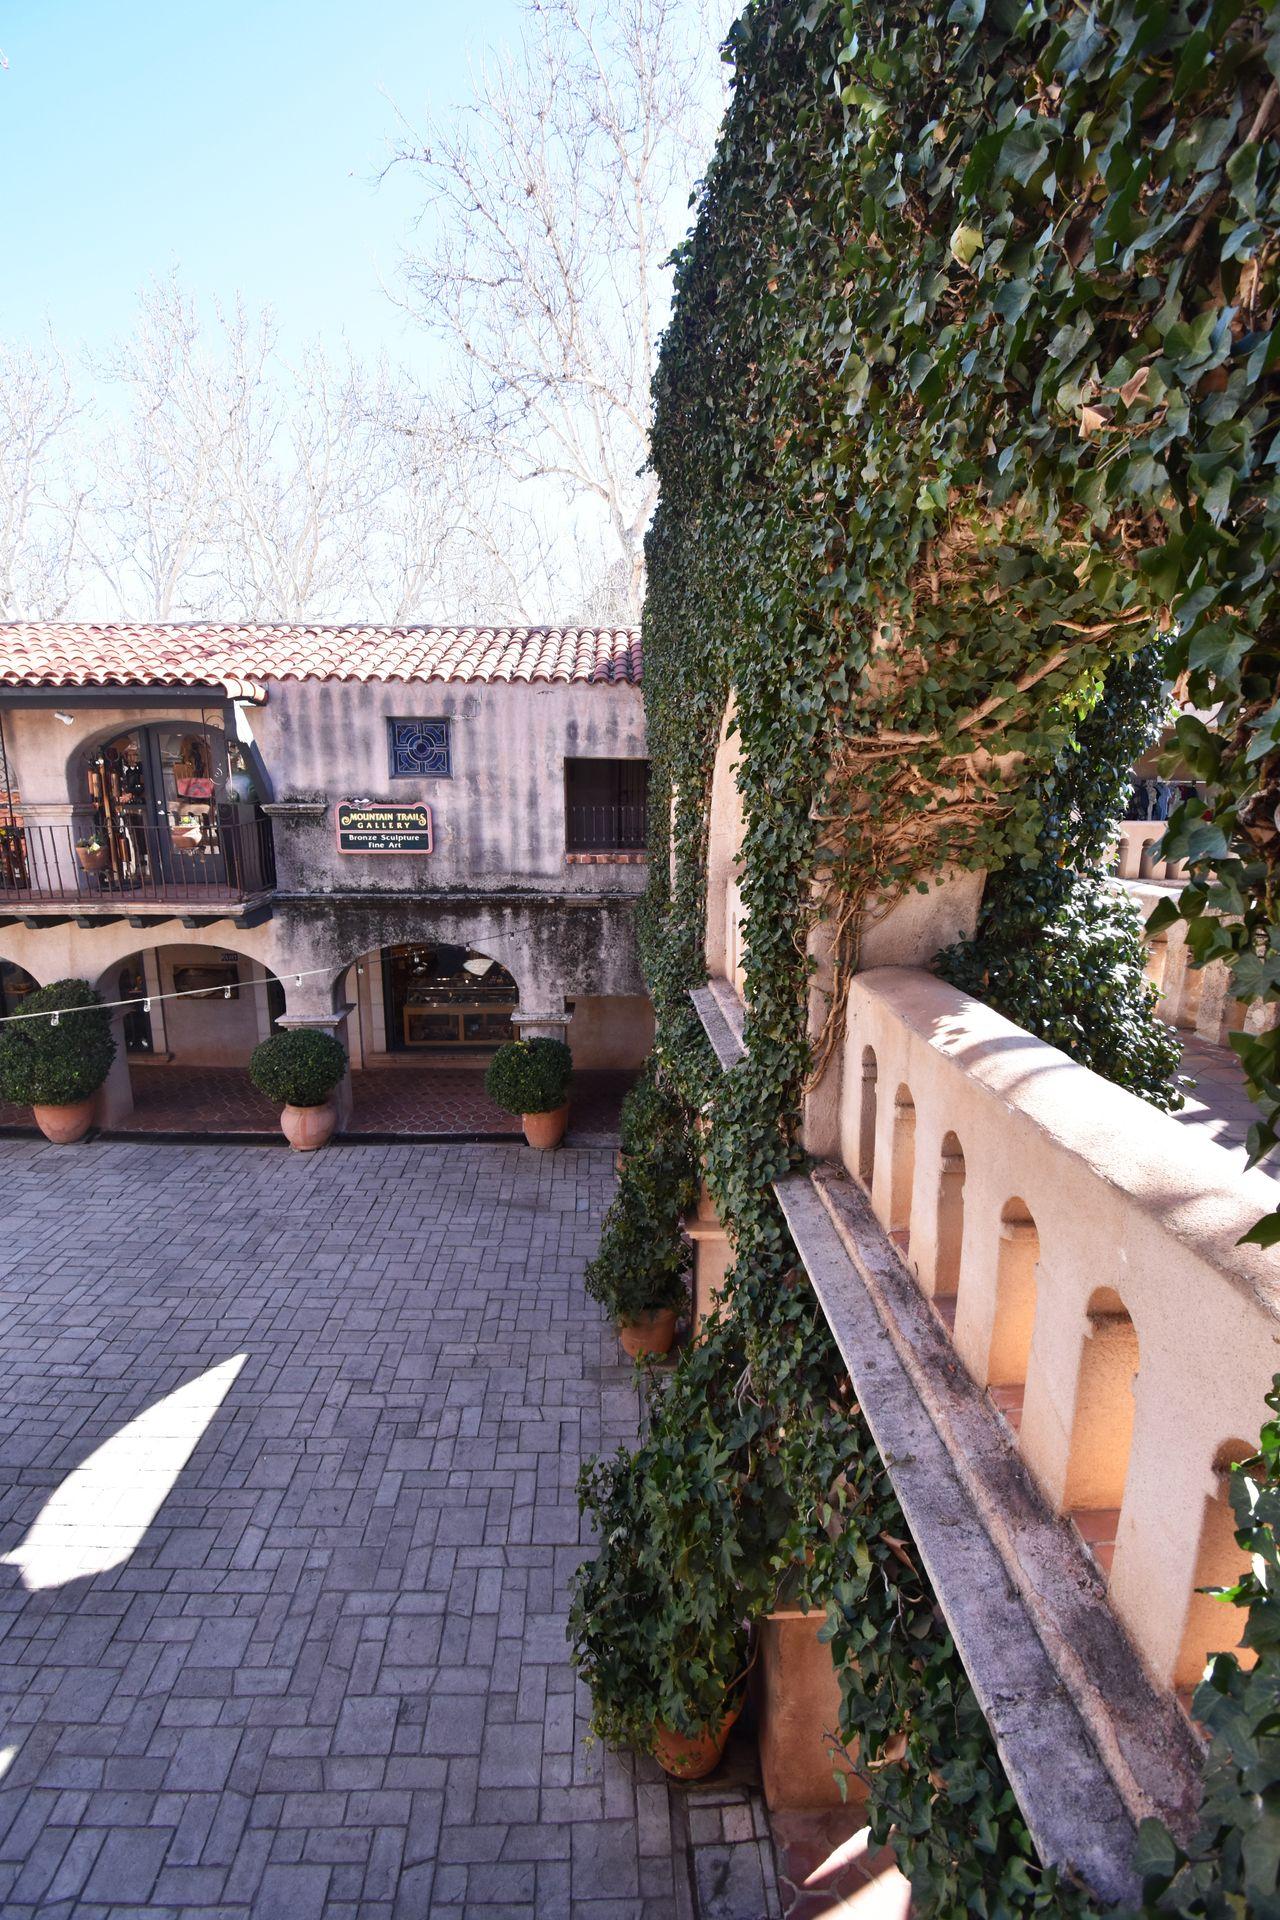 An outdoor shopping area with arches and a wall covered in green vines. This view looks down at Tlaquepaque Arts and Shopping Village from an upper balcony.